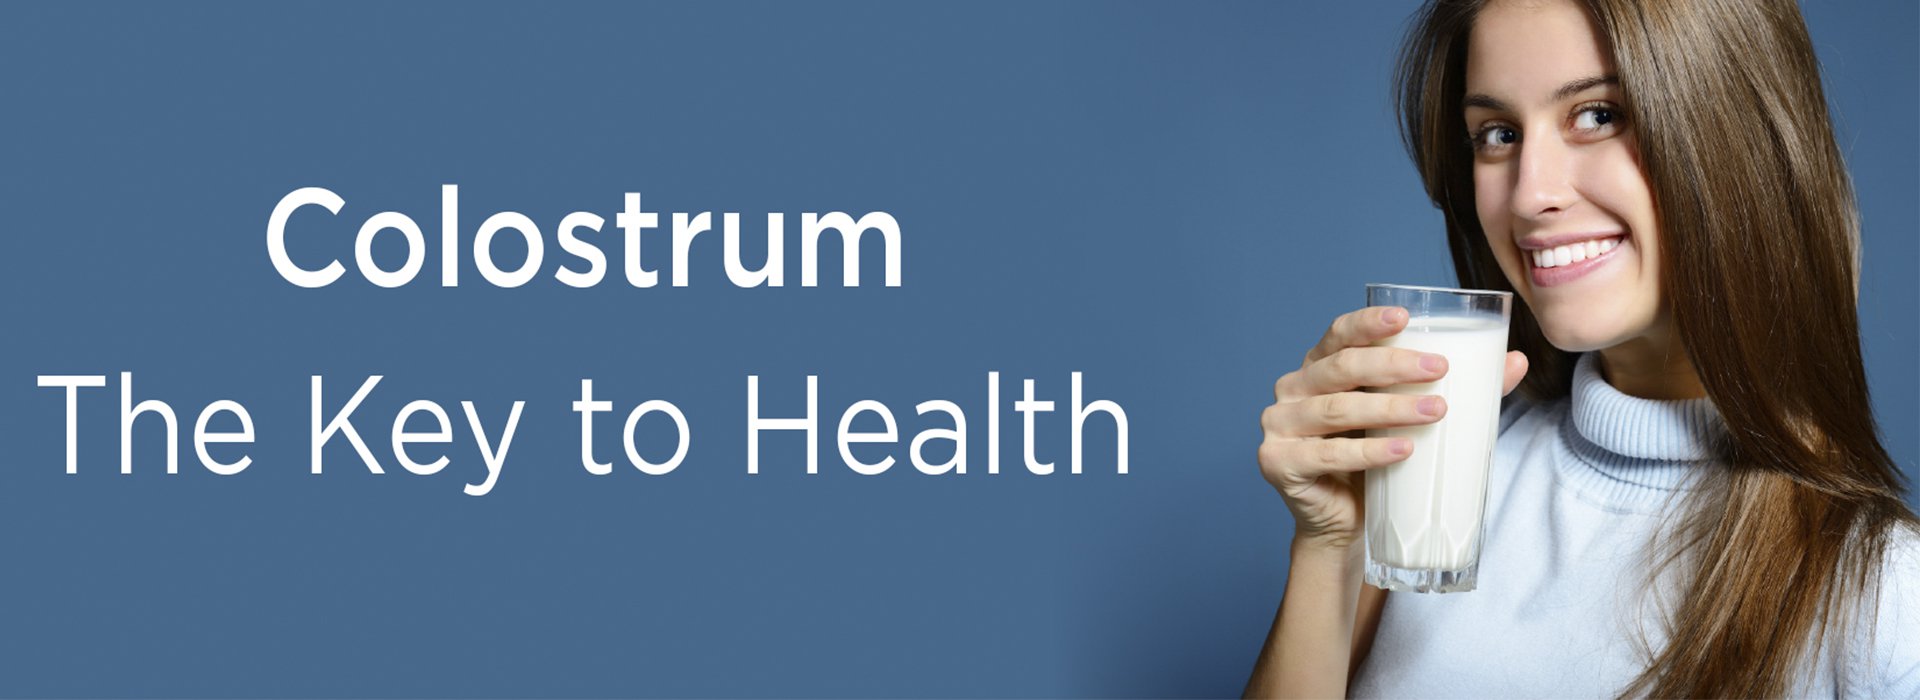 New Image International:Colostrum – The Key To Health